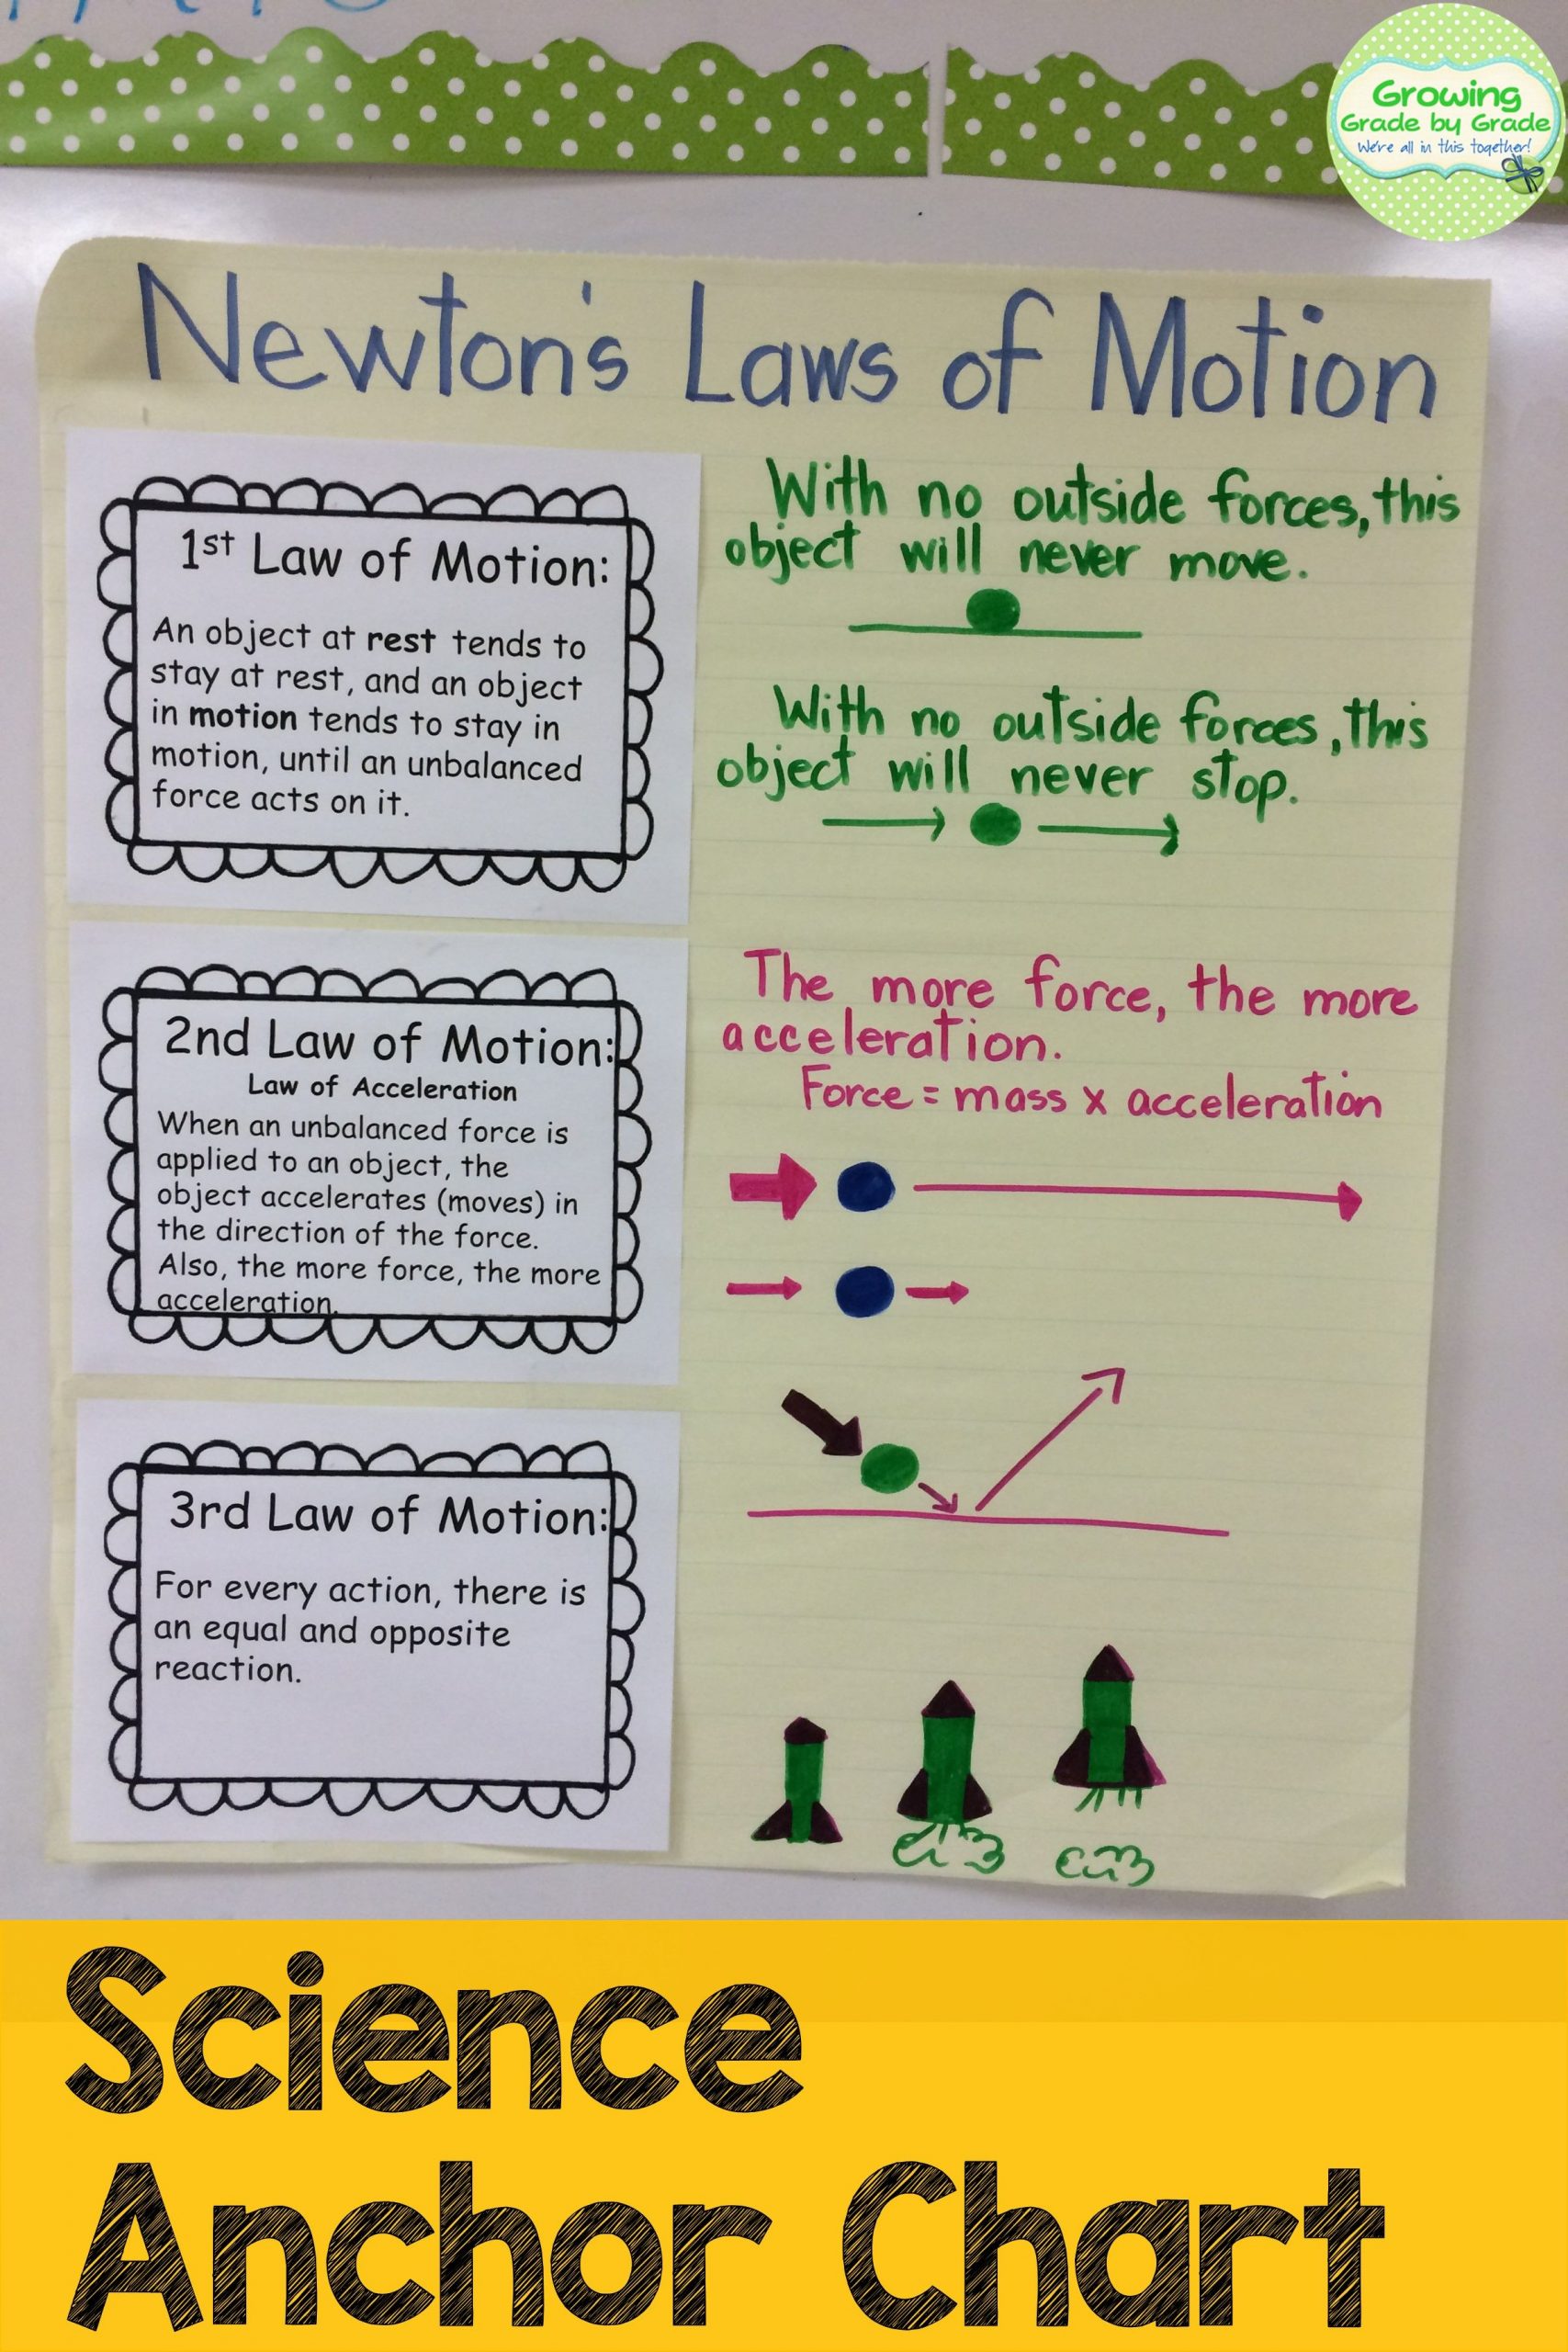 Engage Students With Great Visuals. Find More Science Helps